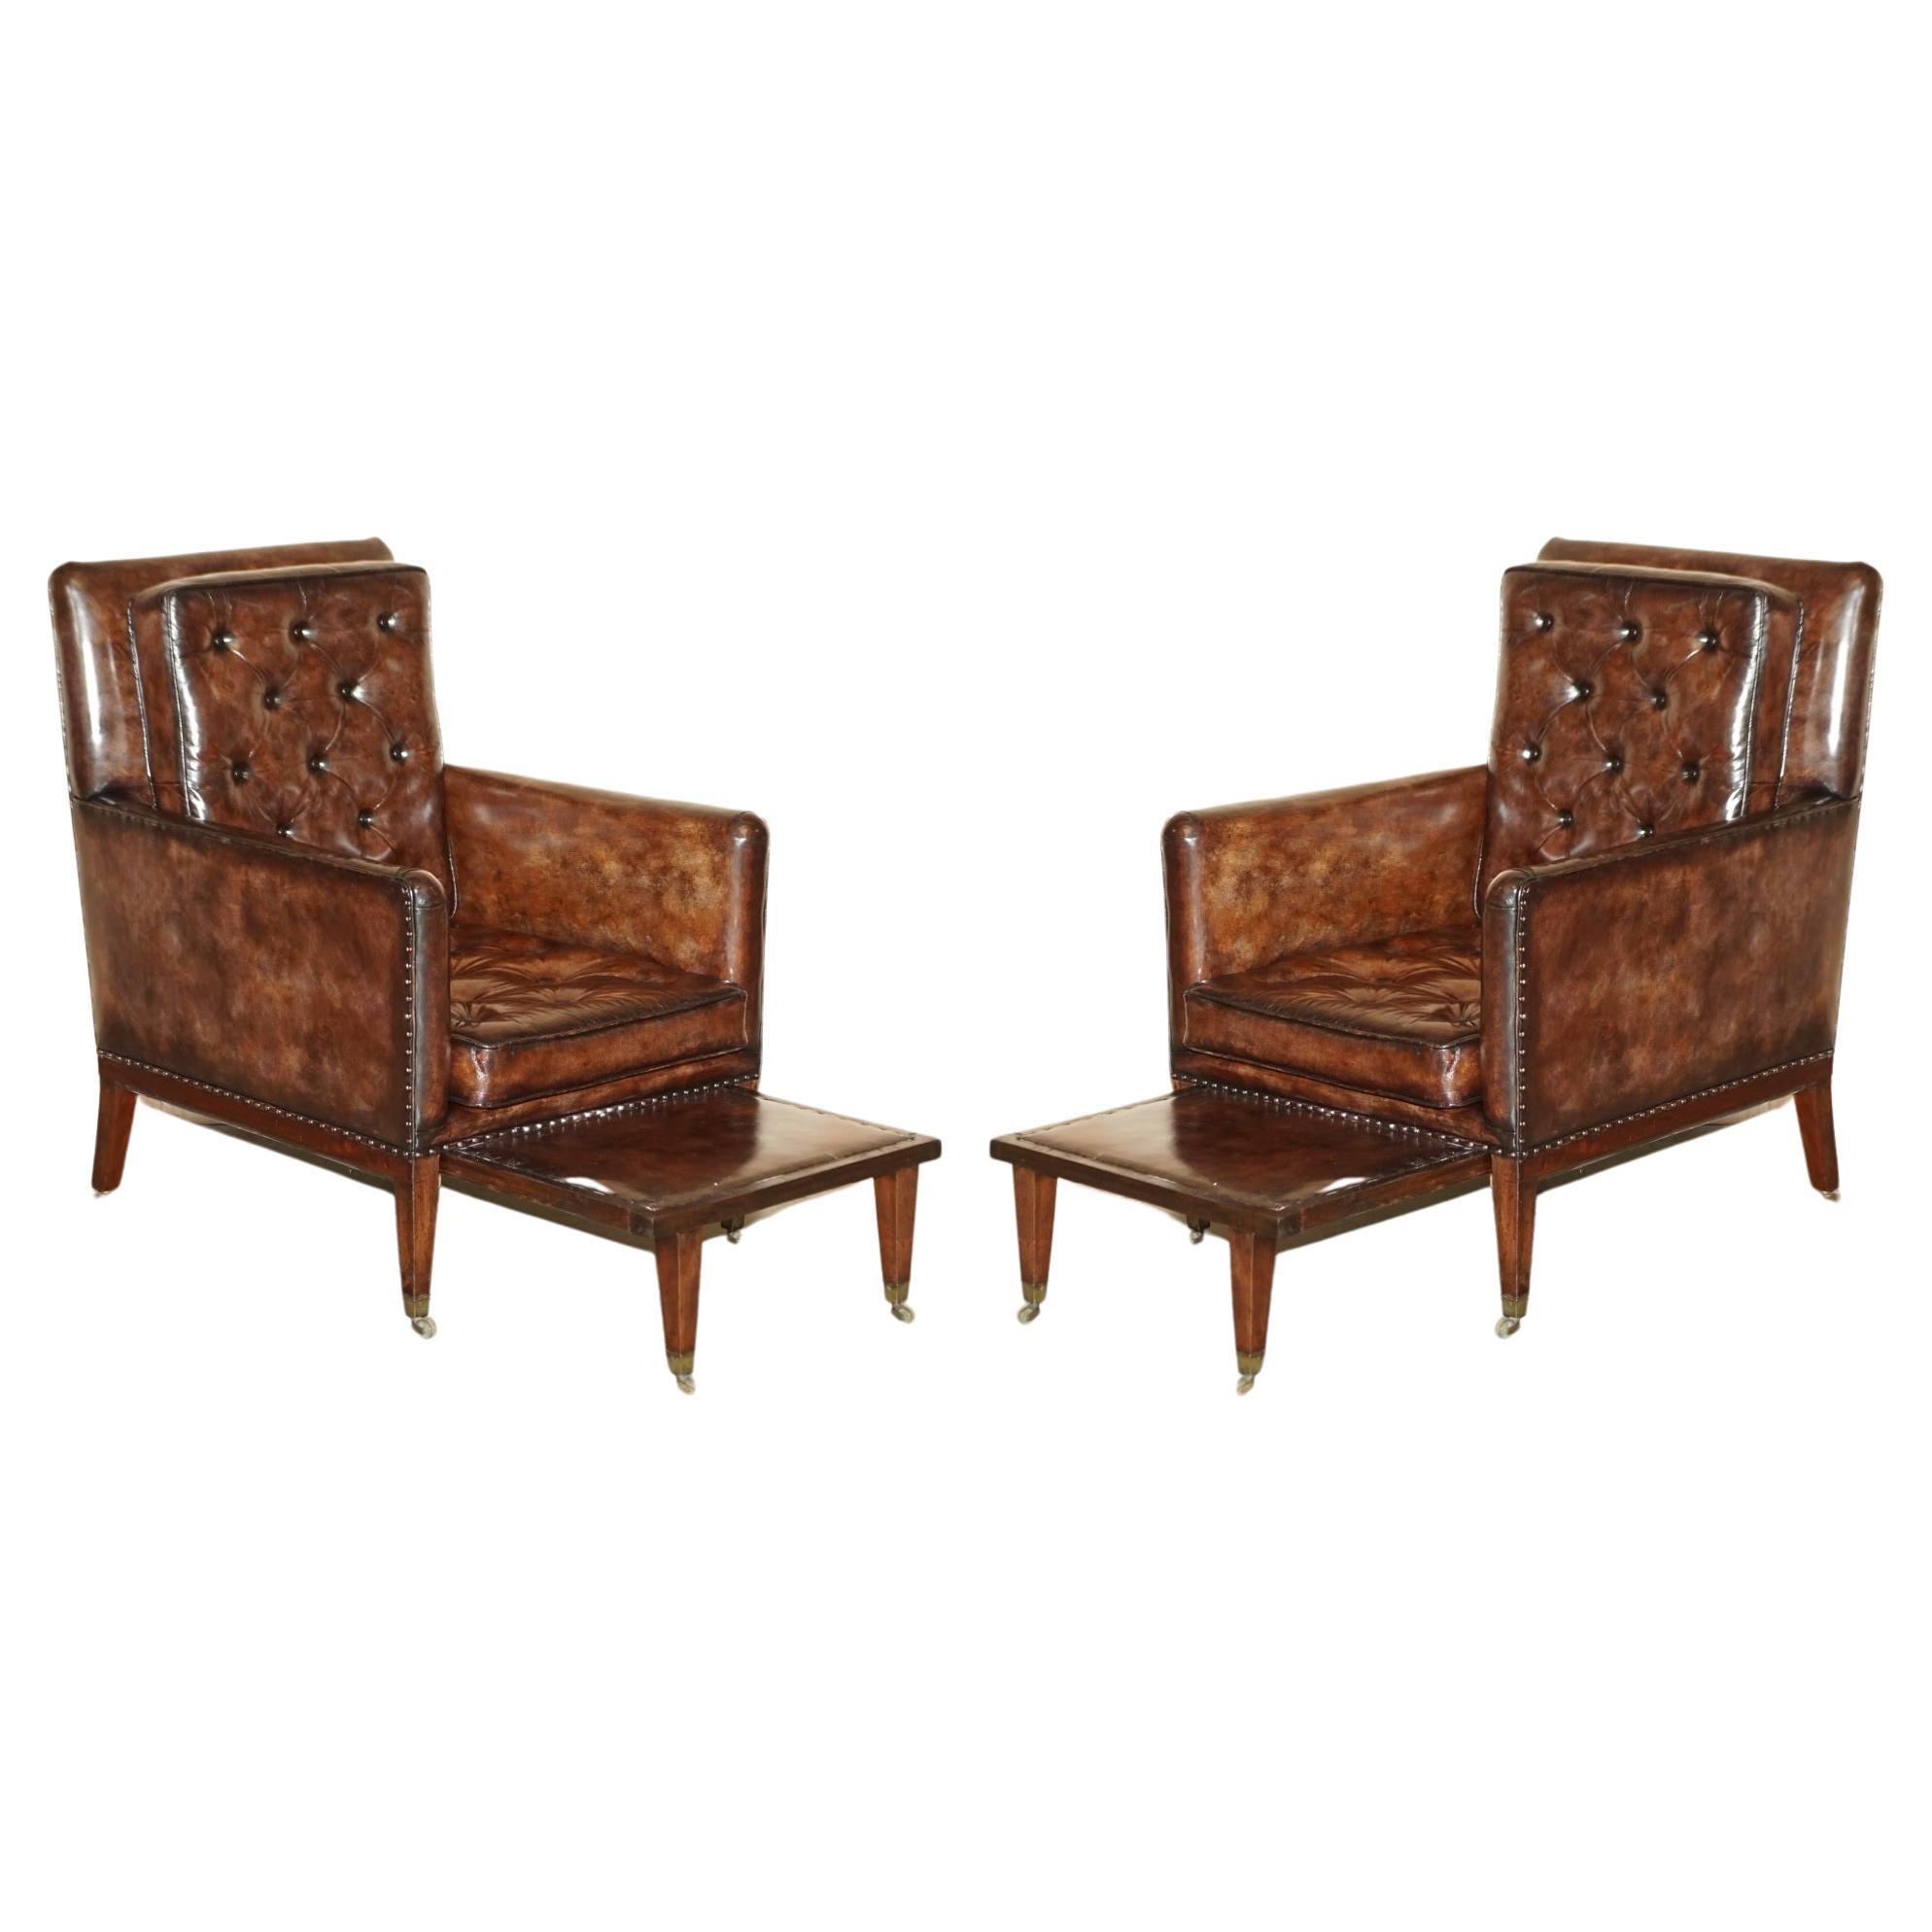 Pair of Antique Regency Brown Leather Chesterfield Armchairs Extending Stools For Sale